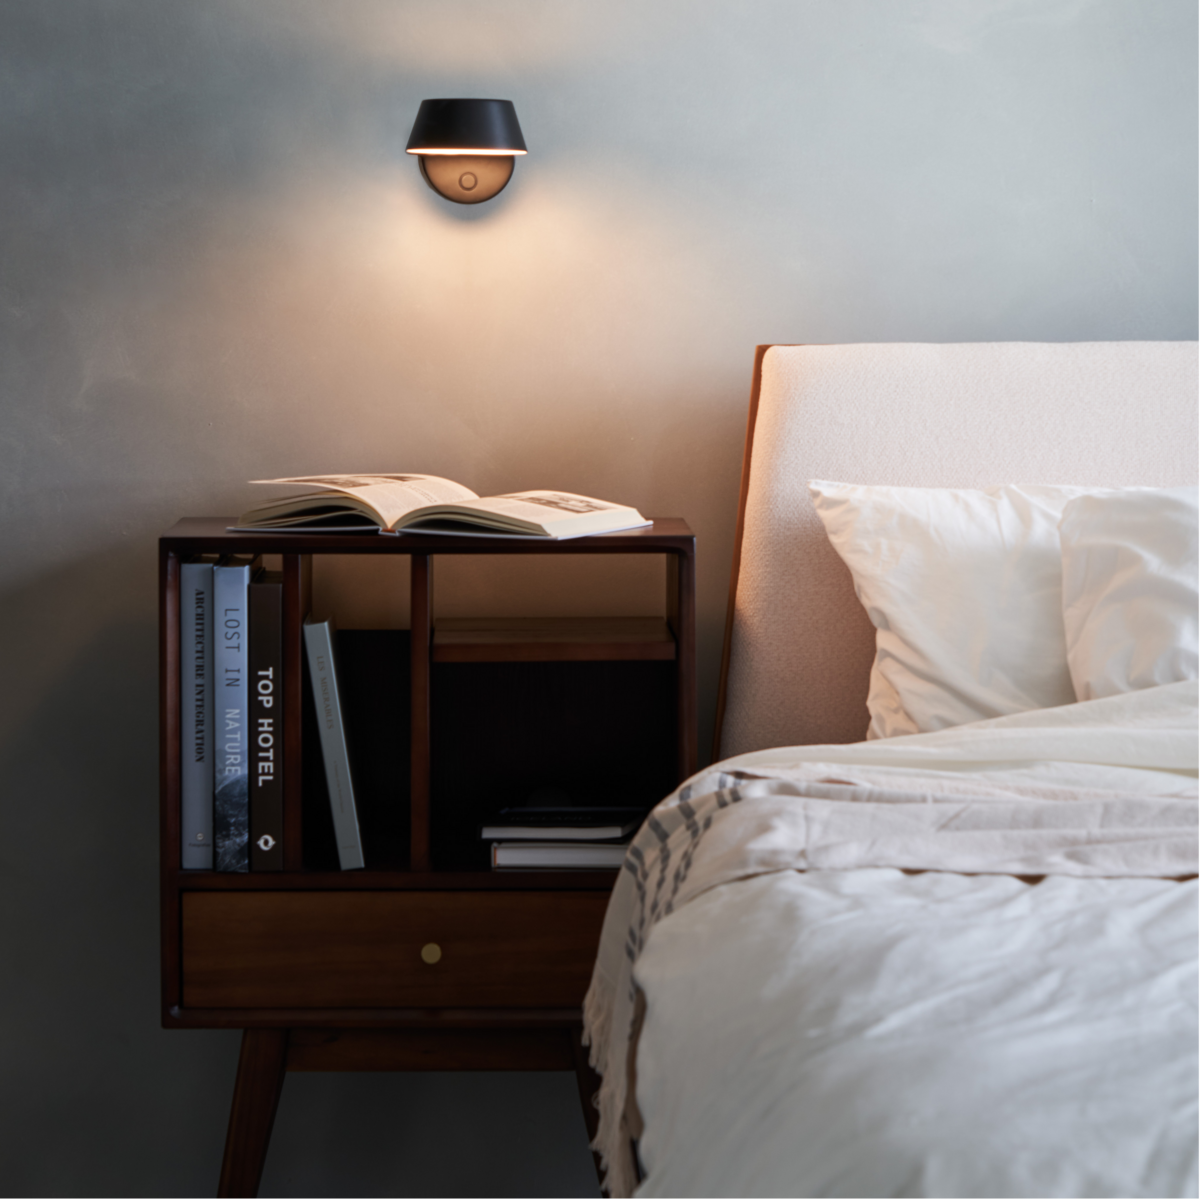 A wall sconce above a nightstand and bed.